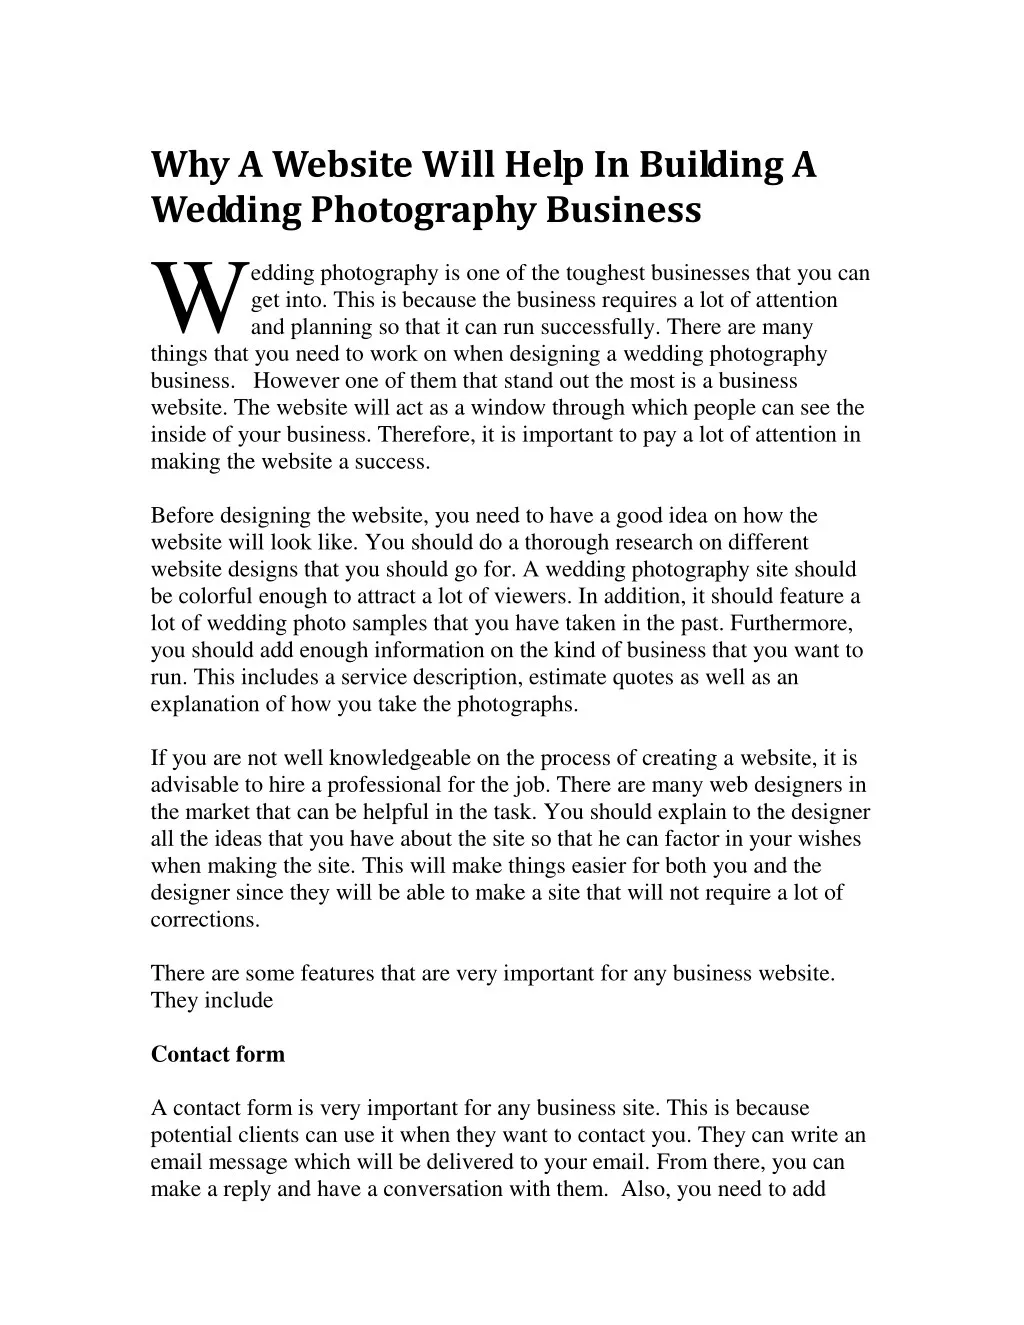 why a website will help in building a wedding